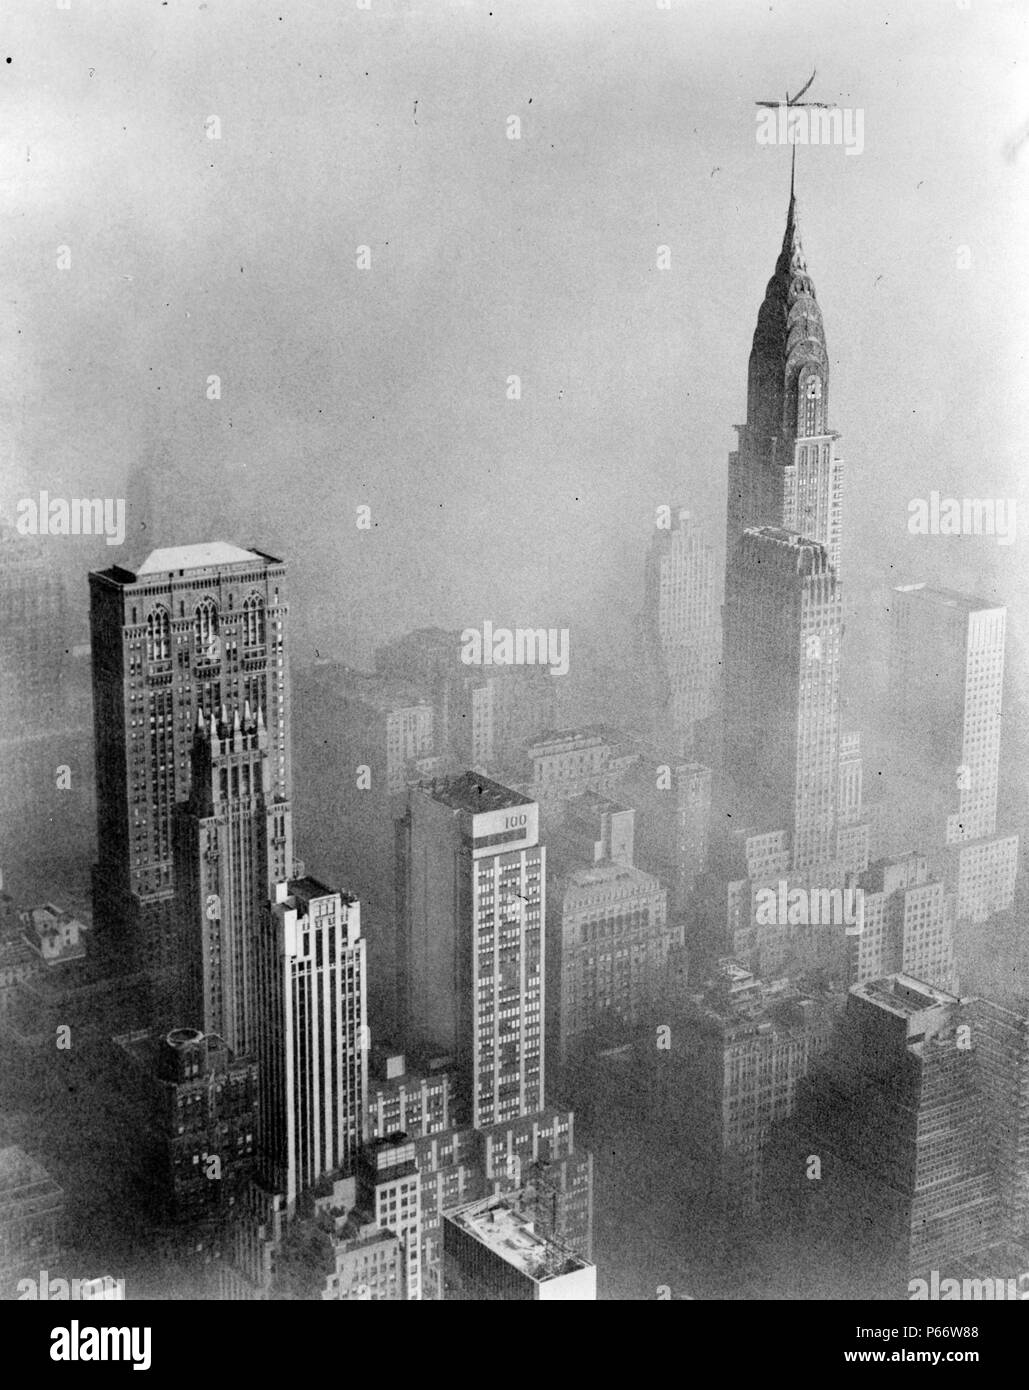 Smog obscures view of Chrysler Building from Empire State Building, New York City Stock Photo